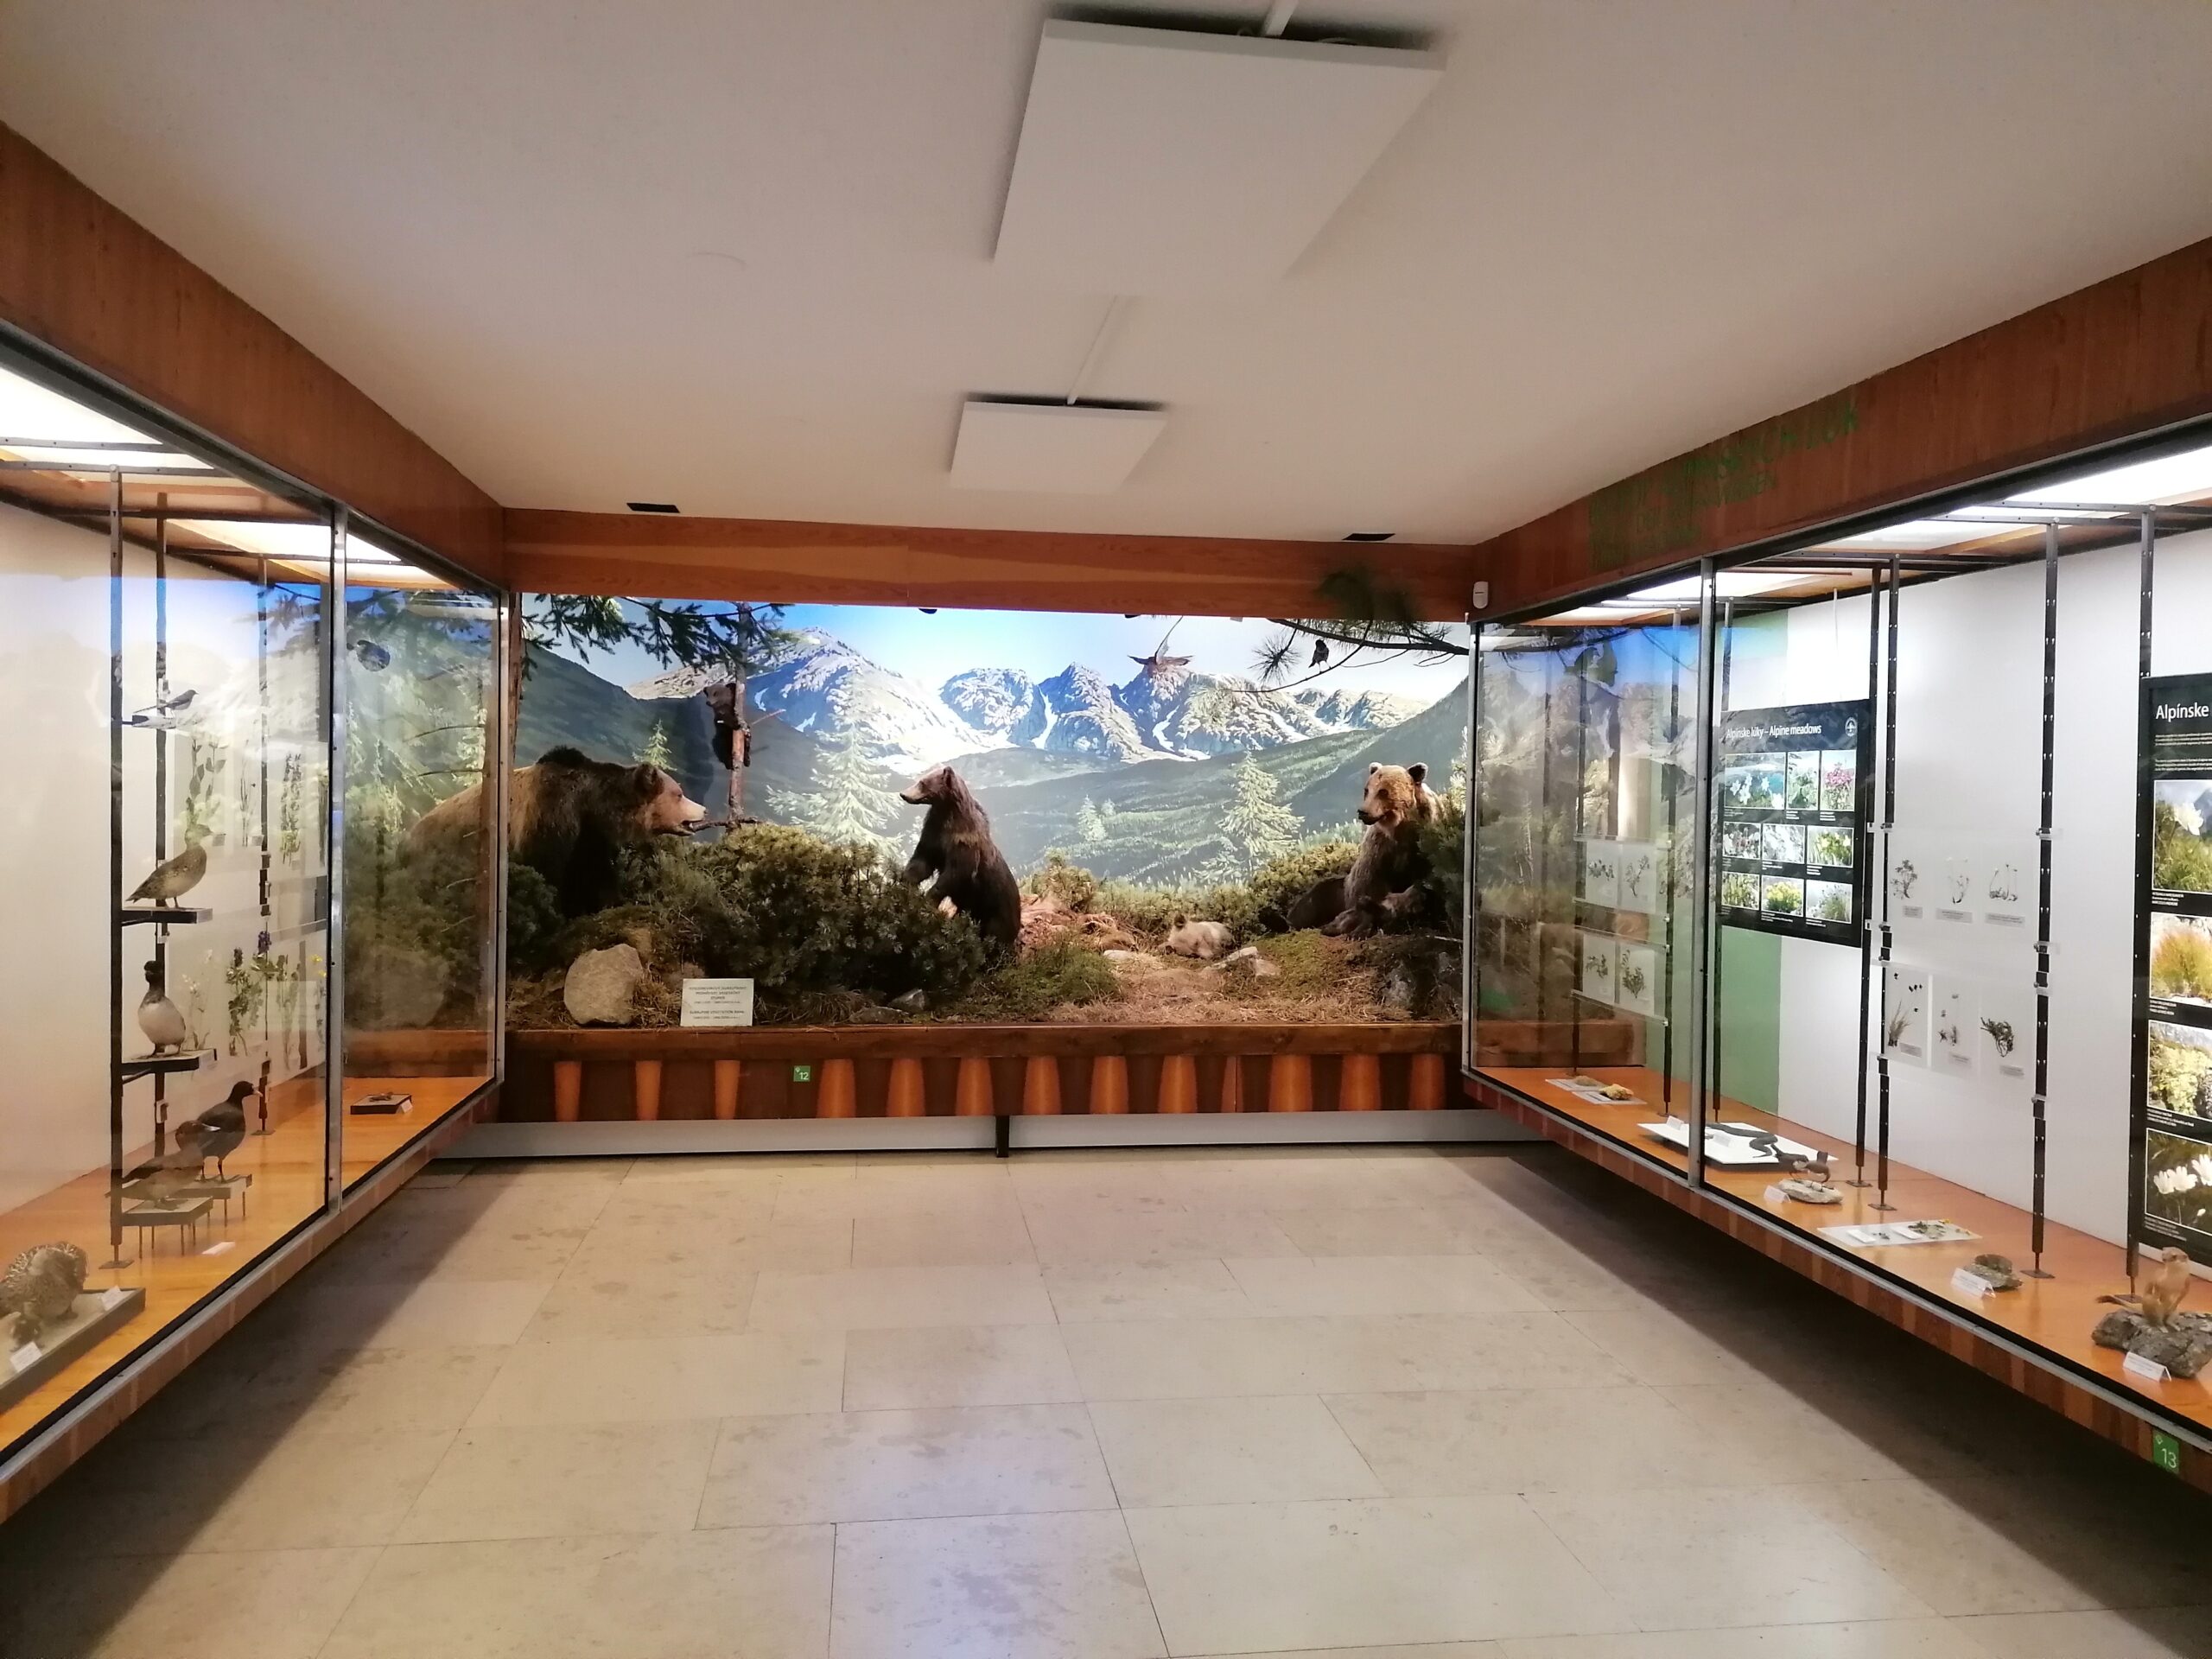 bear enclosure as an exhibit in the museum